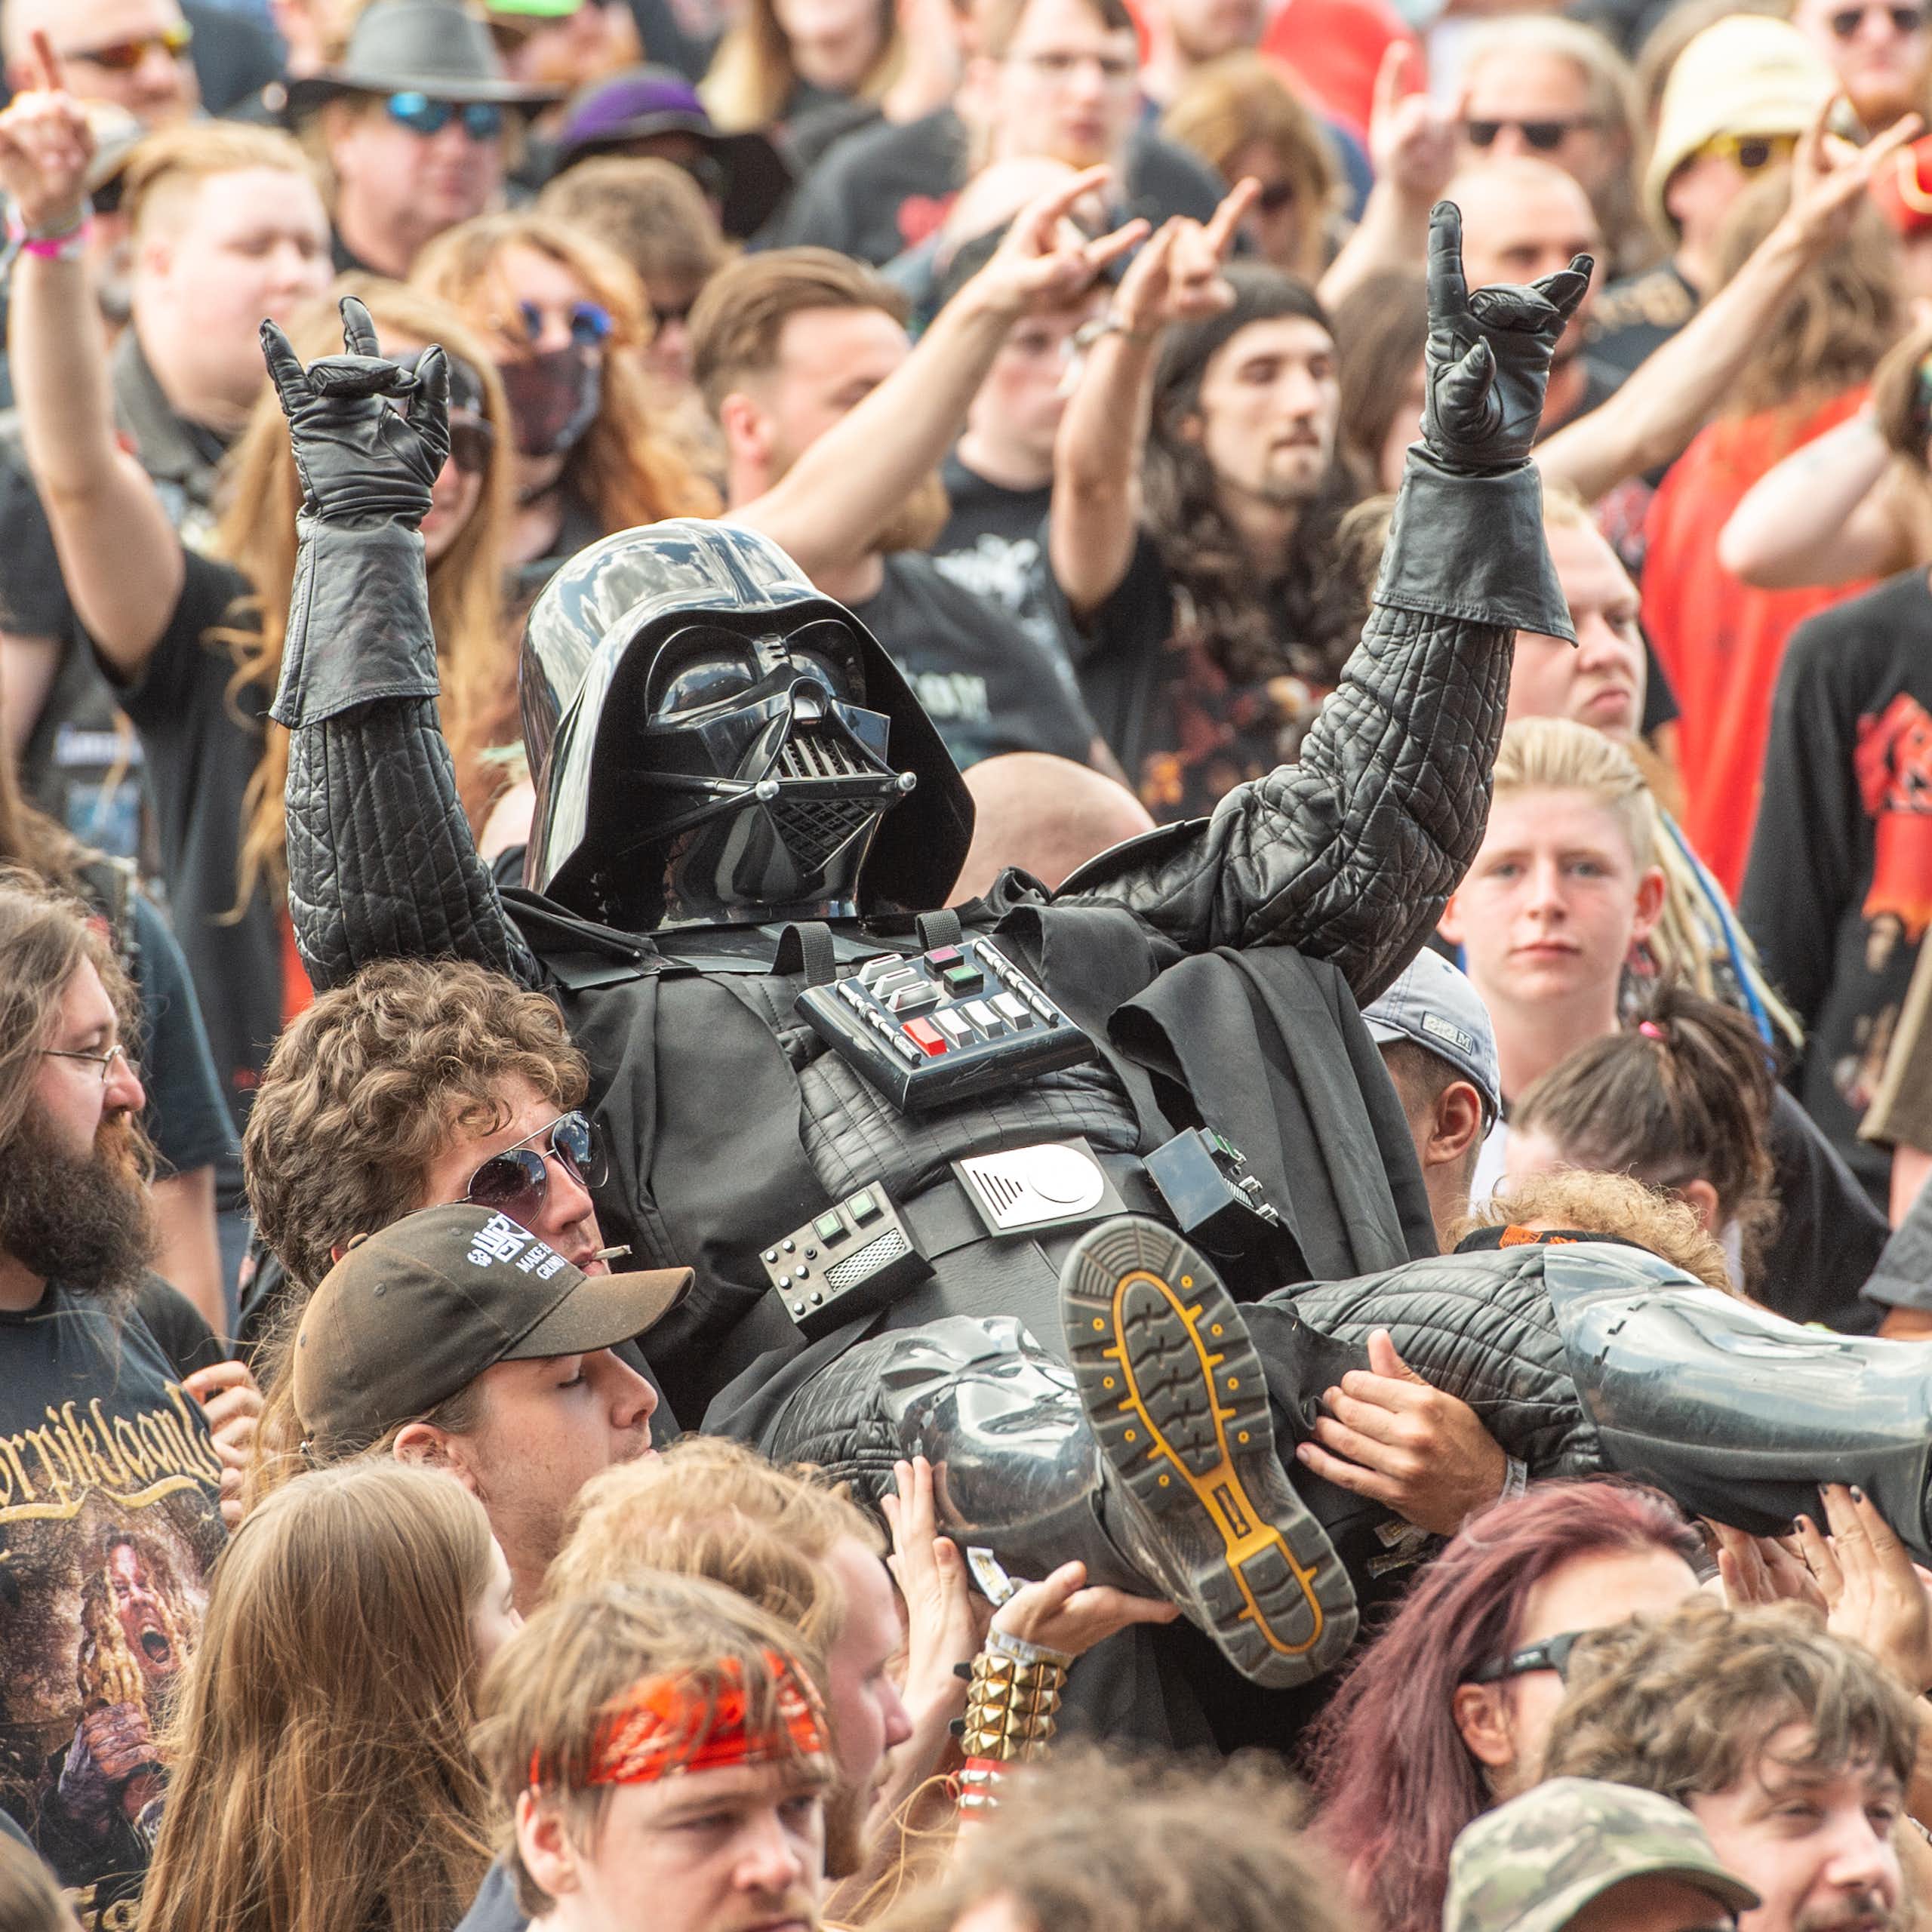 A person in a Darth Vader costume flashes a heavy metal salute as he is carried by others in the crowd.